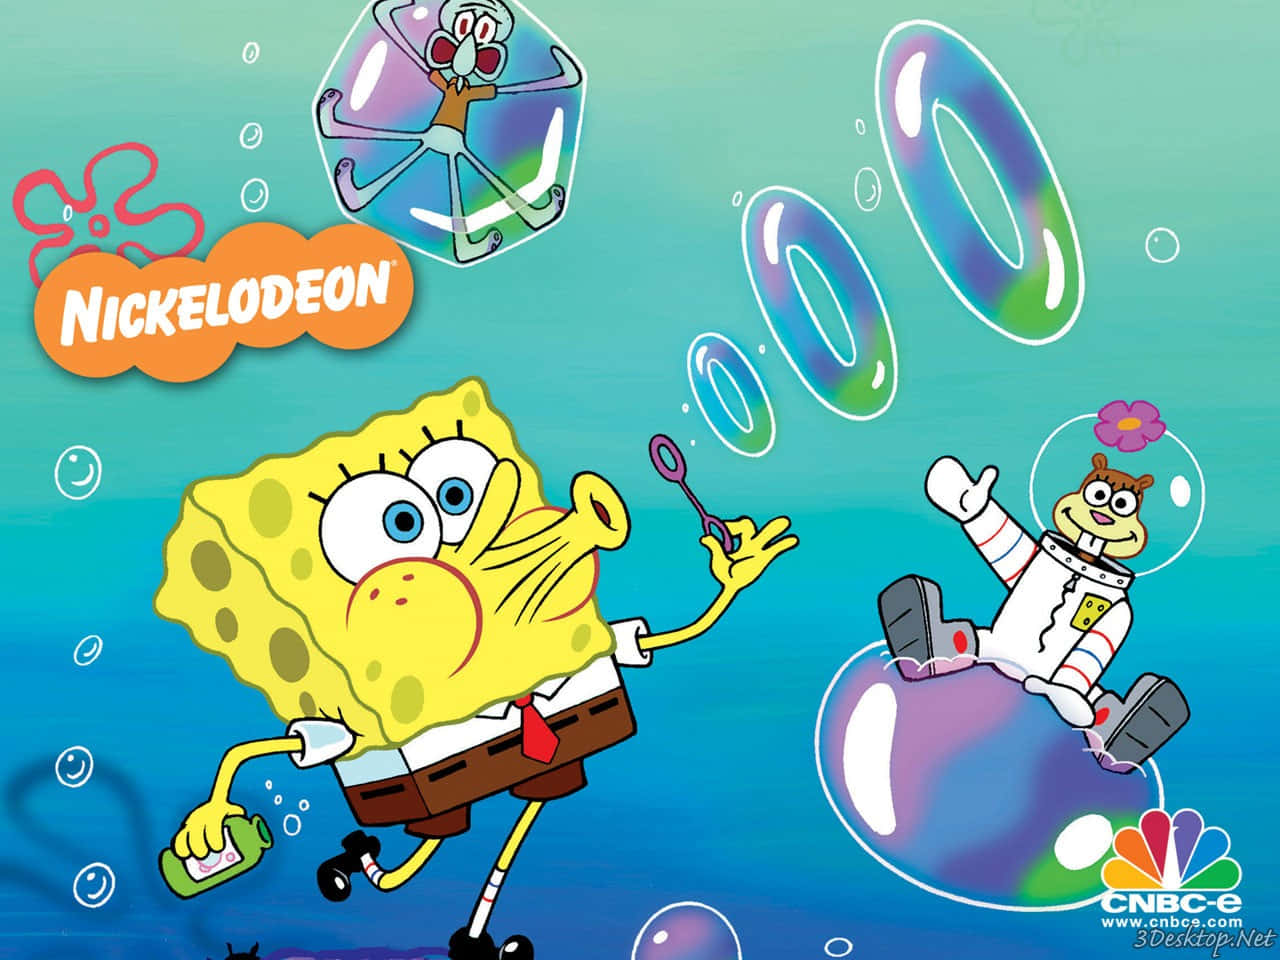 All of your favorite SpongeBob characters gathered together! Wallpaper